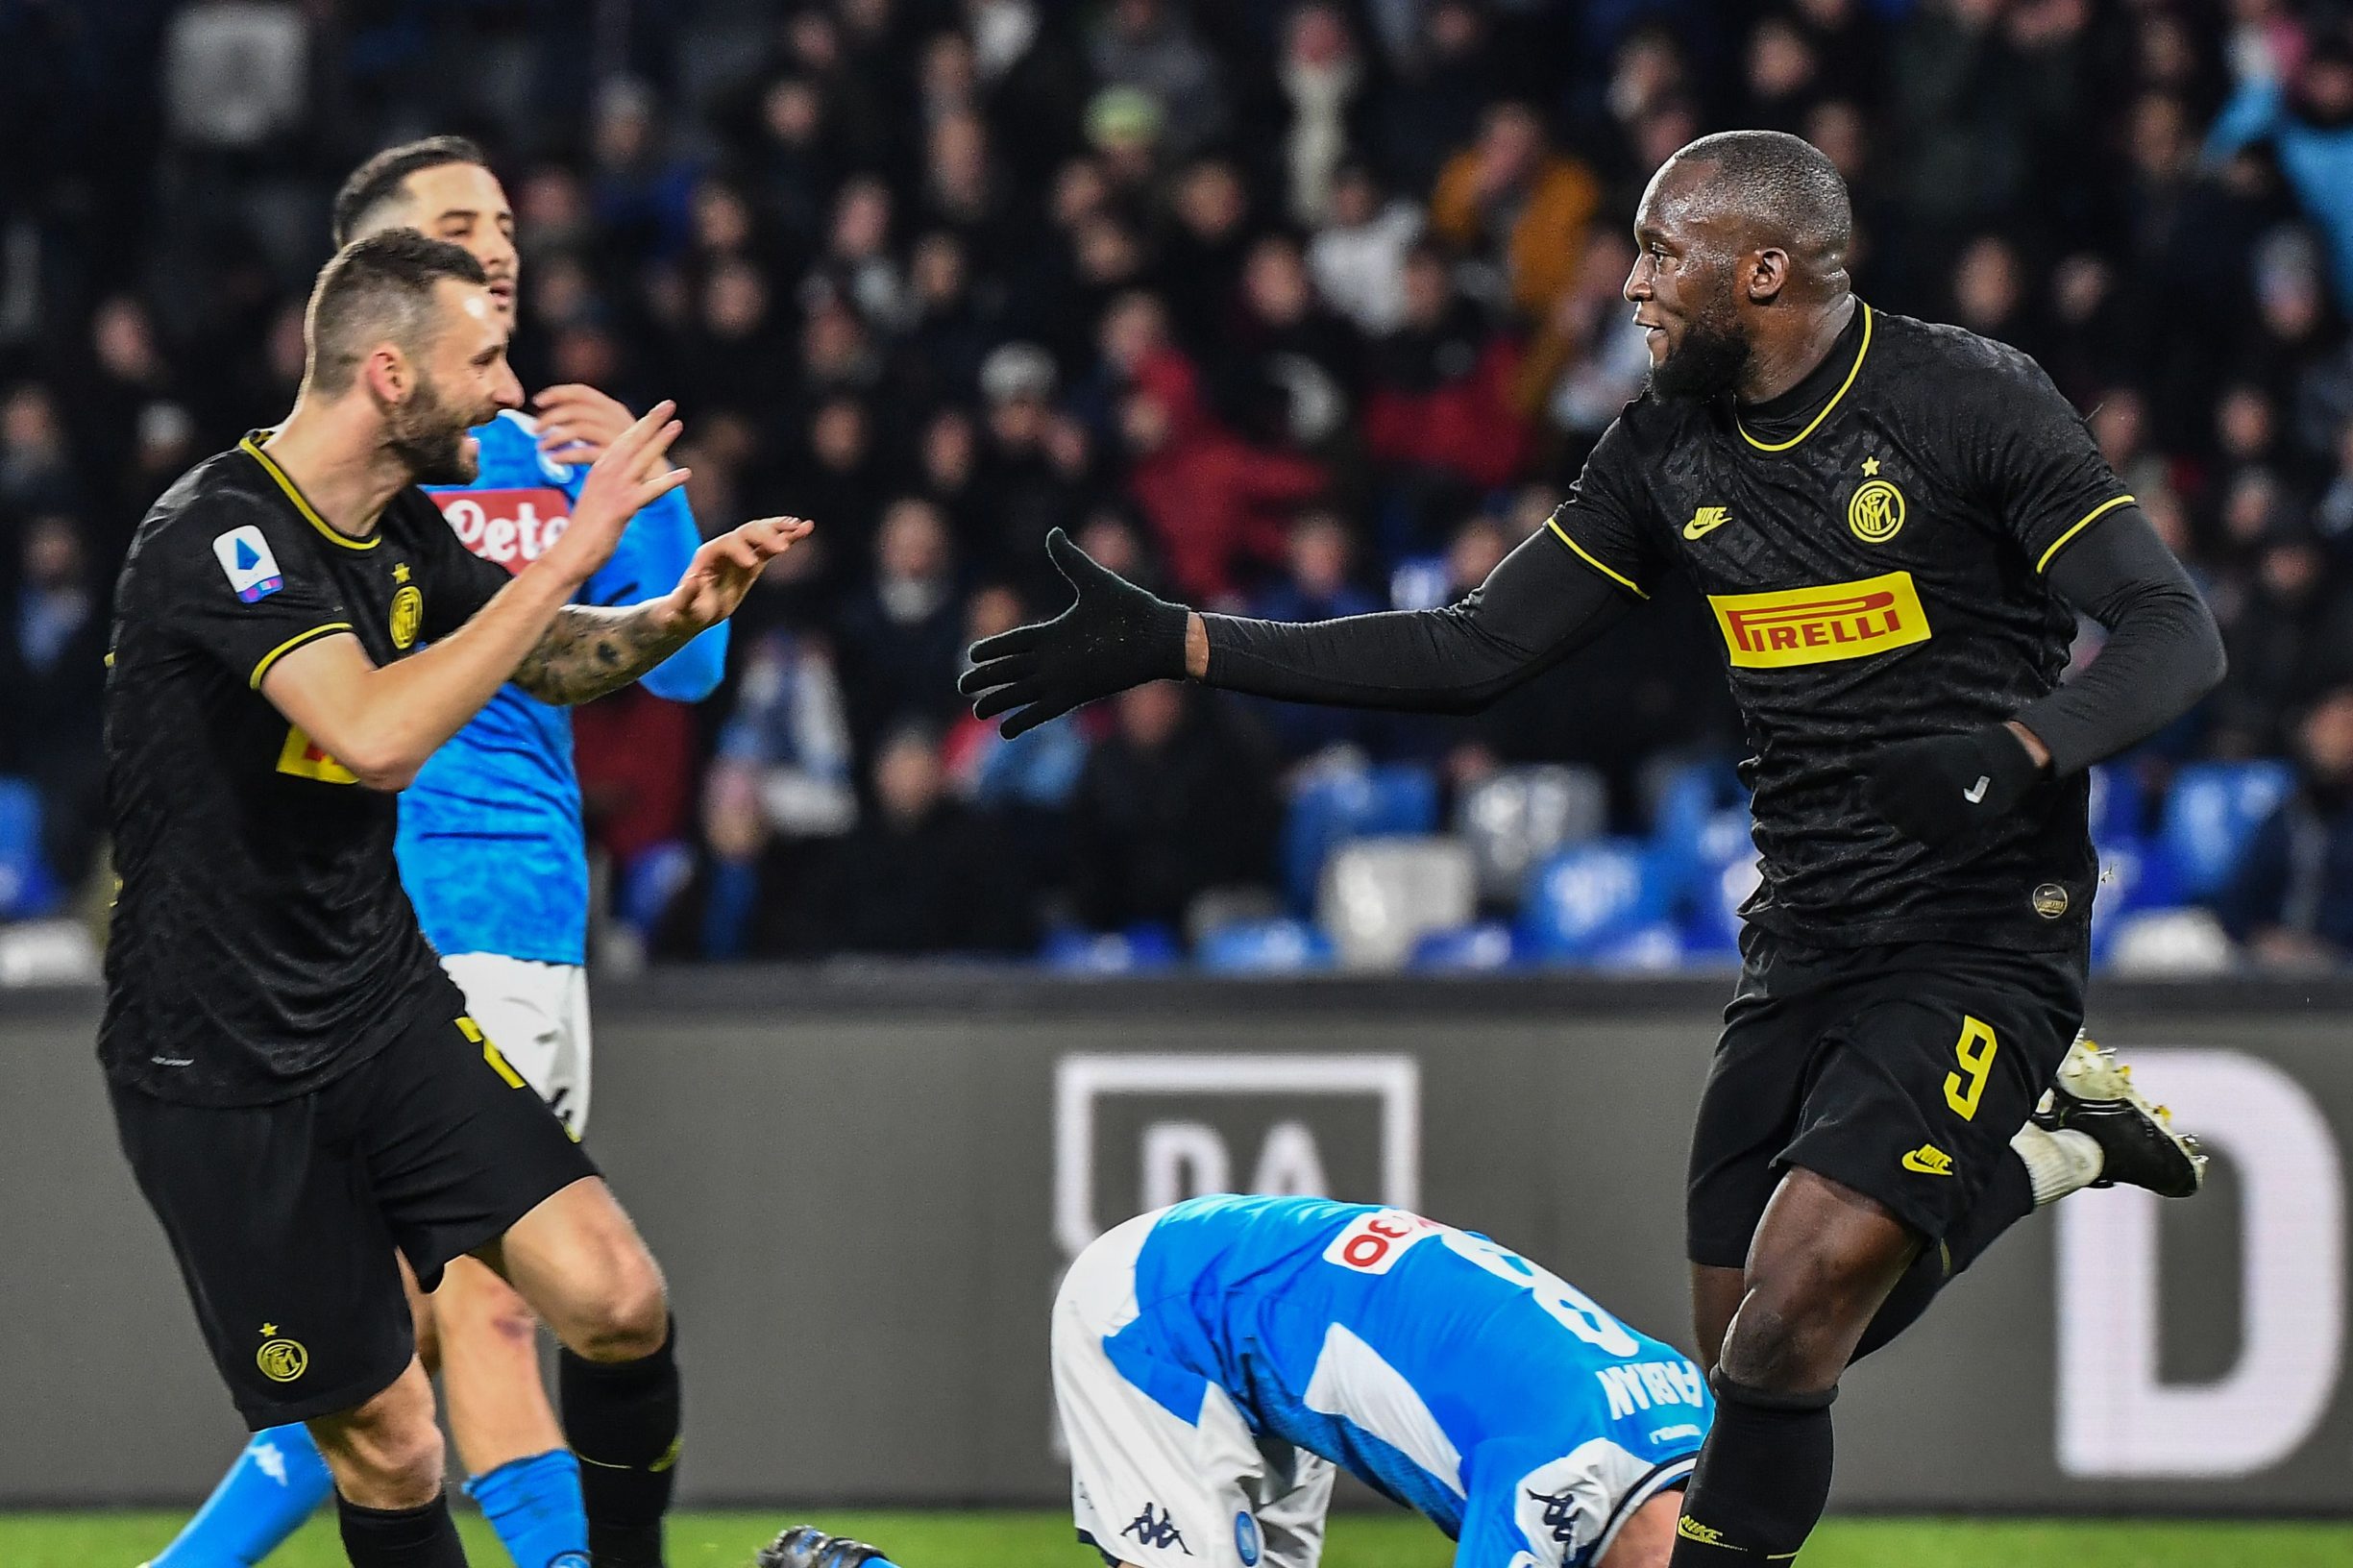 Inter Milan's Belgian forward Romelu Lukaku (R) celebrates with Inter Milan's Croatian defender Marcelo Brozovic after scoring his second goal during the Italian Serie A football match Napoli vs Inter Milan on January 6, 2020 at the San Paolo stadium in Naples. (Photo by Tiziana FABI / AFP)